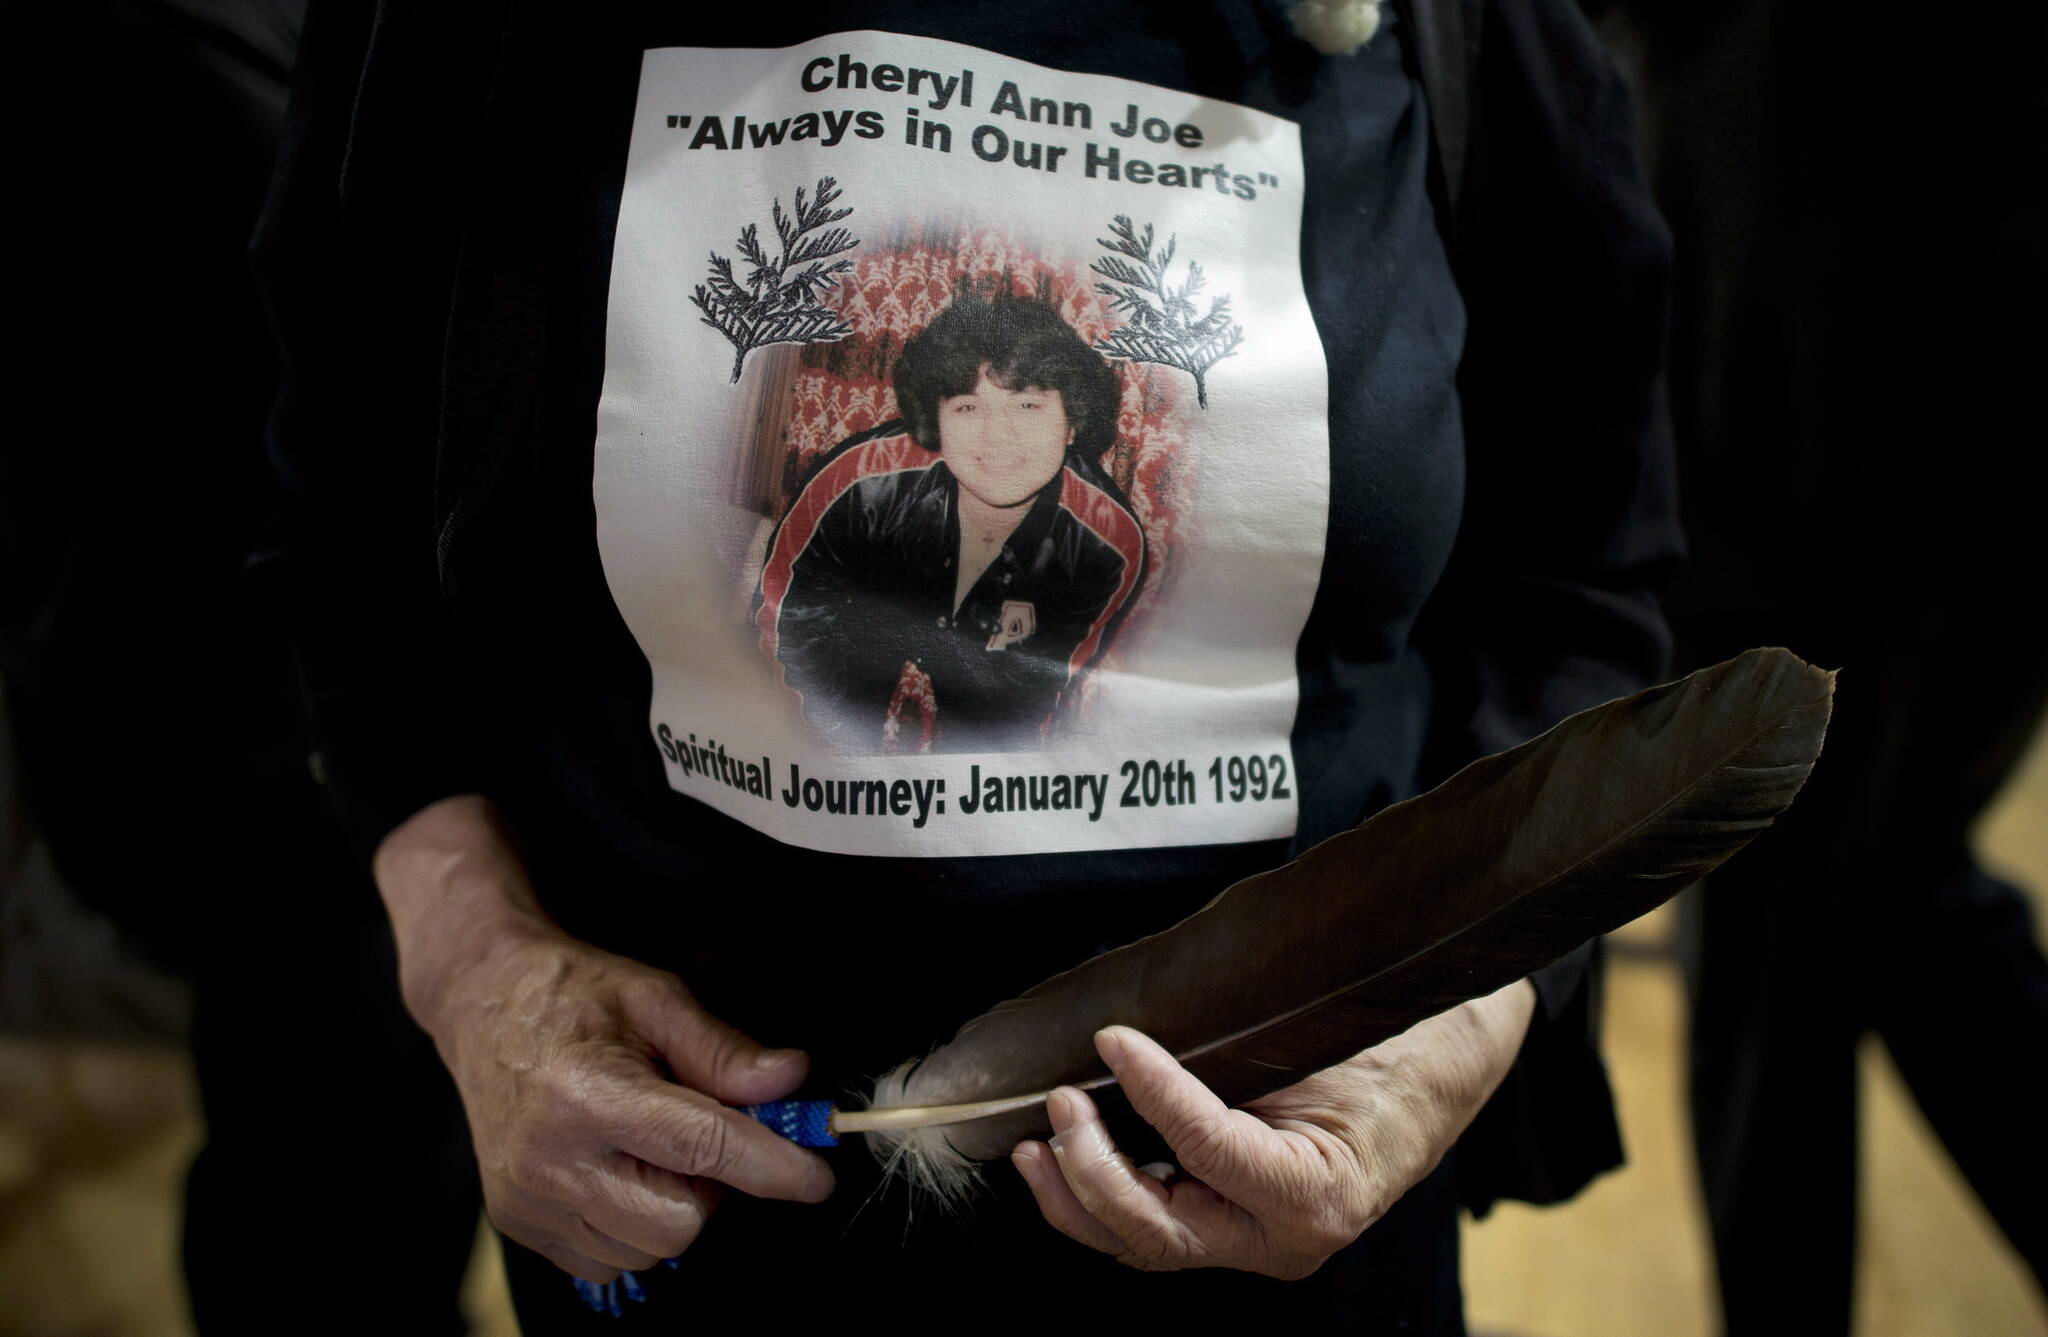 Gertrude Pierre wears a shirt in memory of her niece Cheryl Ann Joe during a signing of a memorandum of understanding in North Vancouver, B.C., Friday, June 13, 2014. Joe, who was murdered in Jan. 1992, was remembered as First Nations groups pledged to end violence against aboriginal women and girls. THE CANADIAN PRESS/Jonathan Hayward